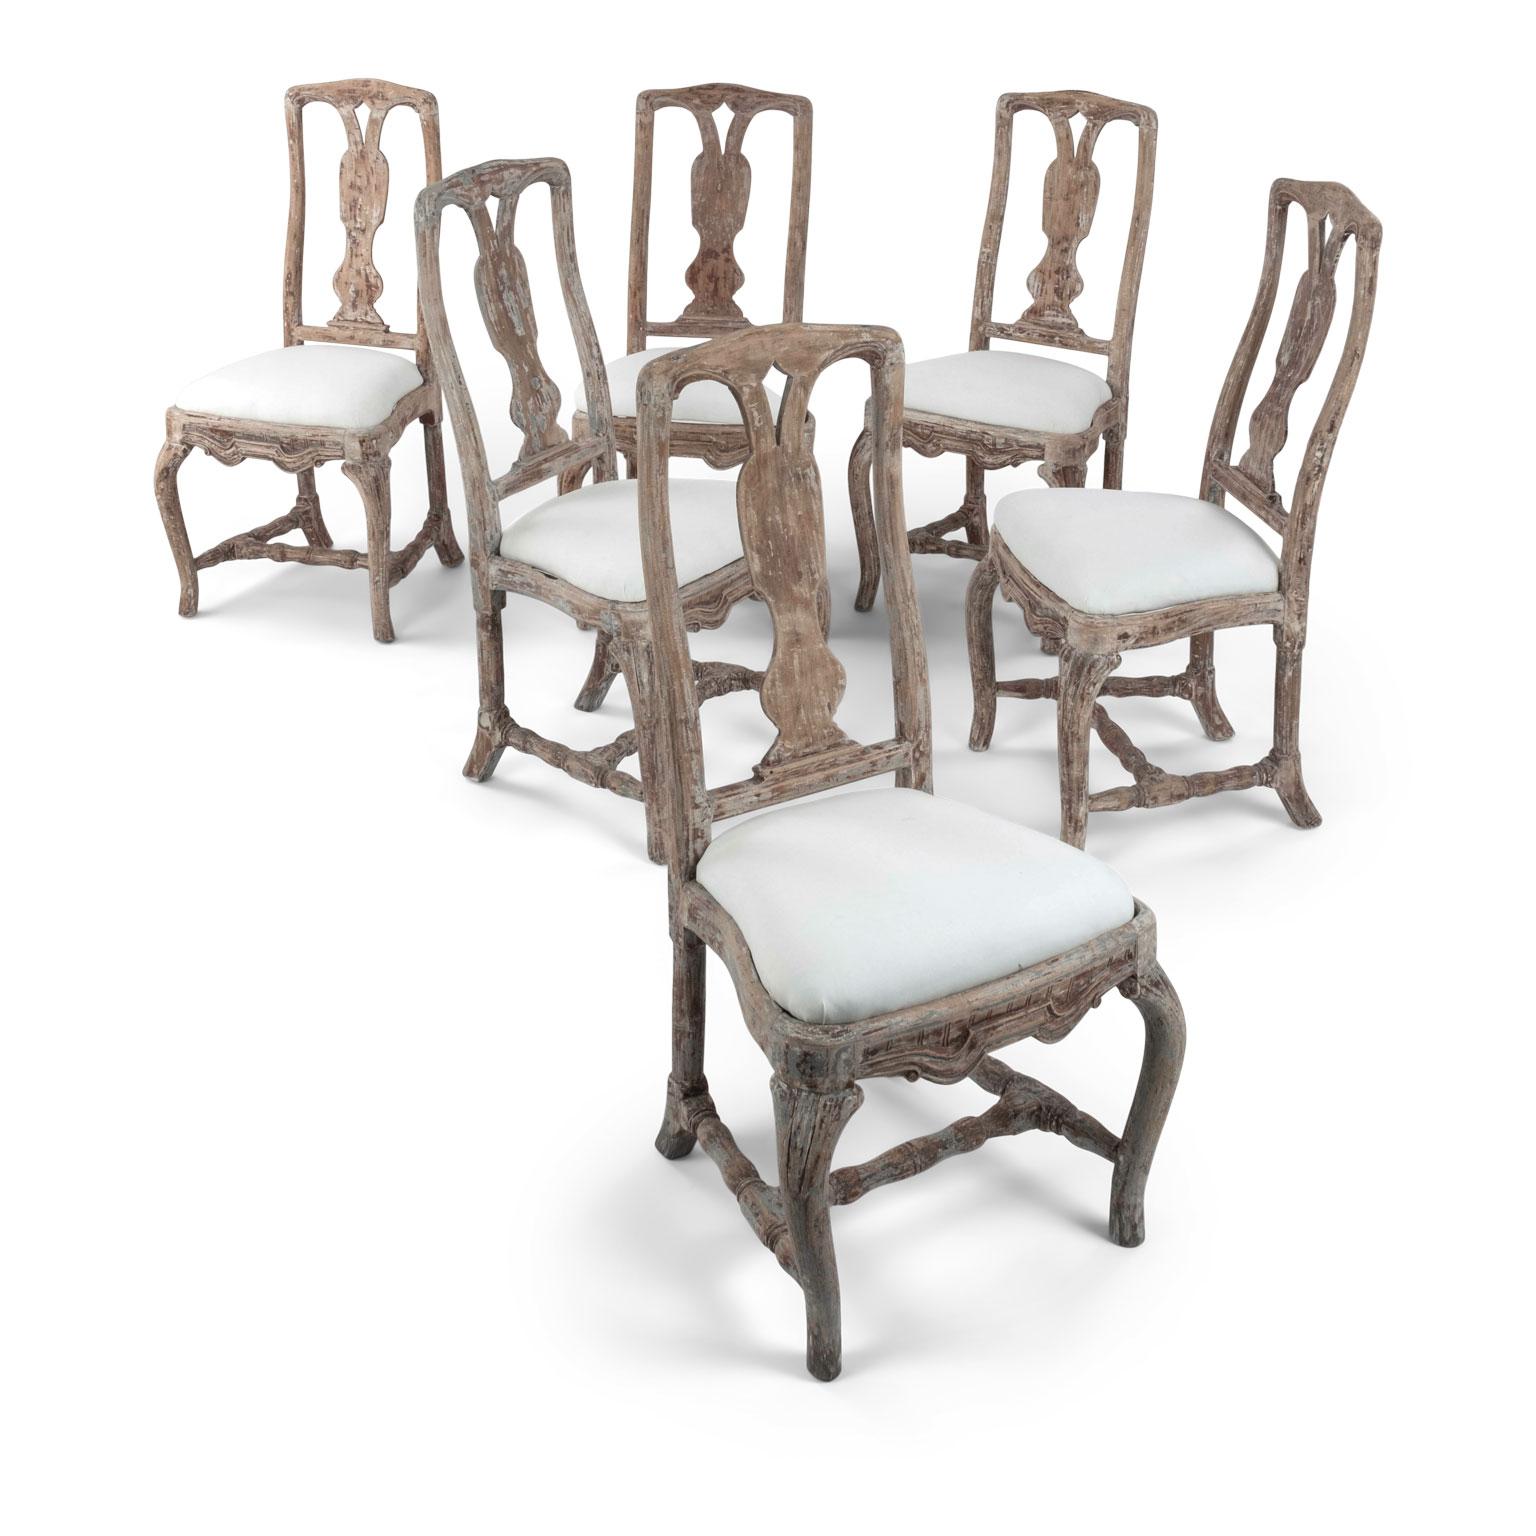 Set of six late baroque Swedish dining chairs, hand-carved circa 1730-1759. Originally gilded. Scraped finish with remnants of gesso, clay-red size and early layers of gray paint. Six sold together and priced $16,800 for the set.